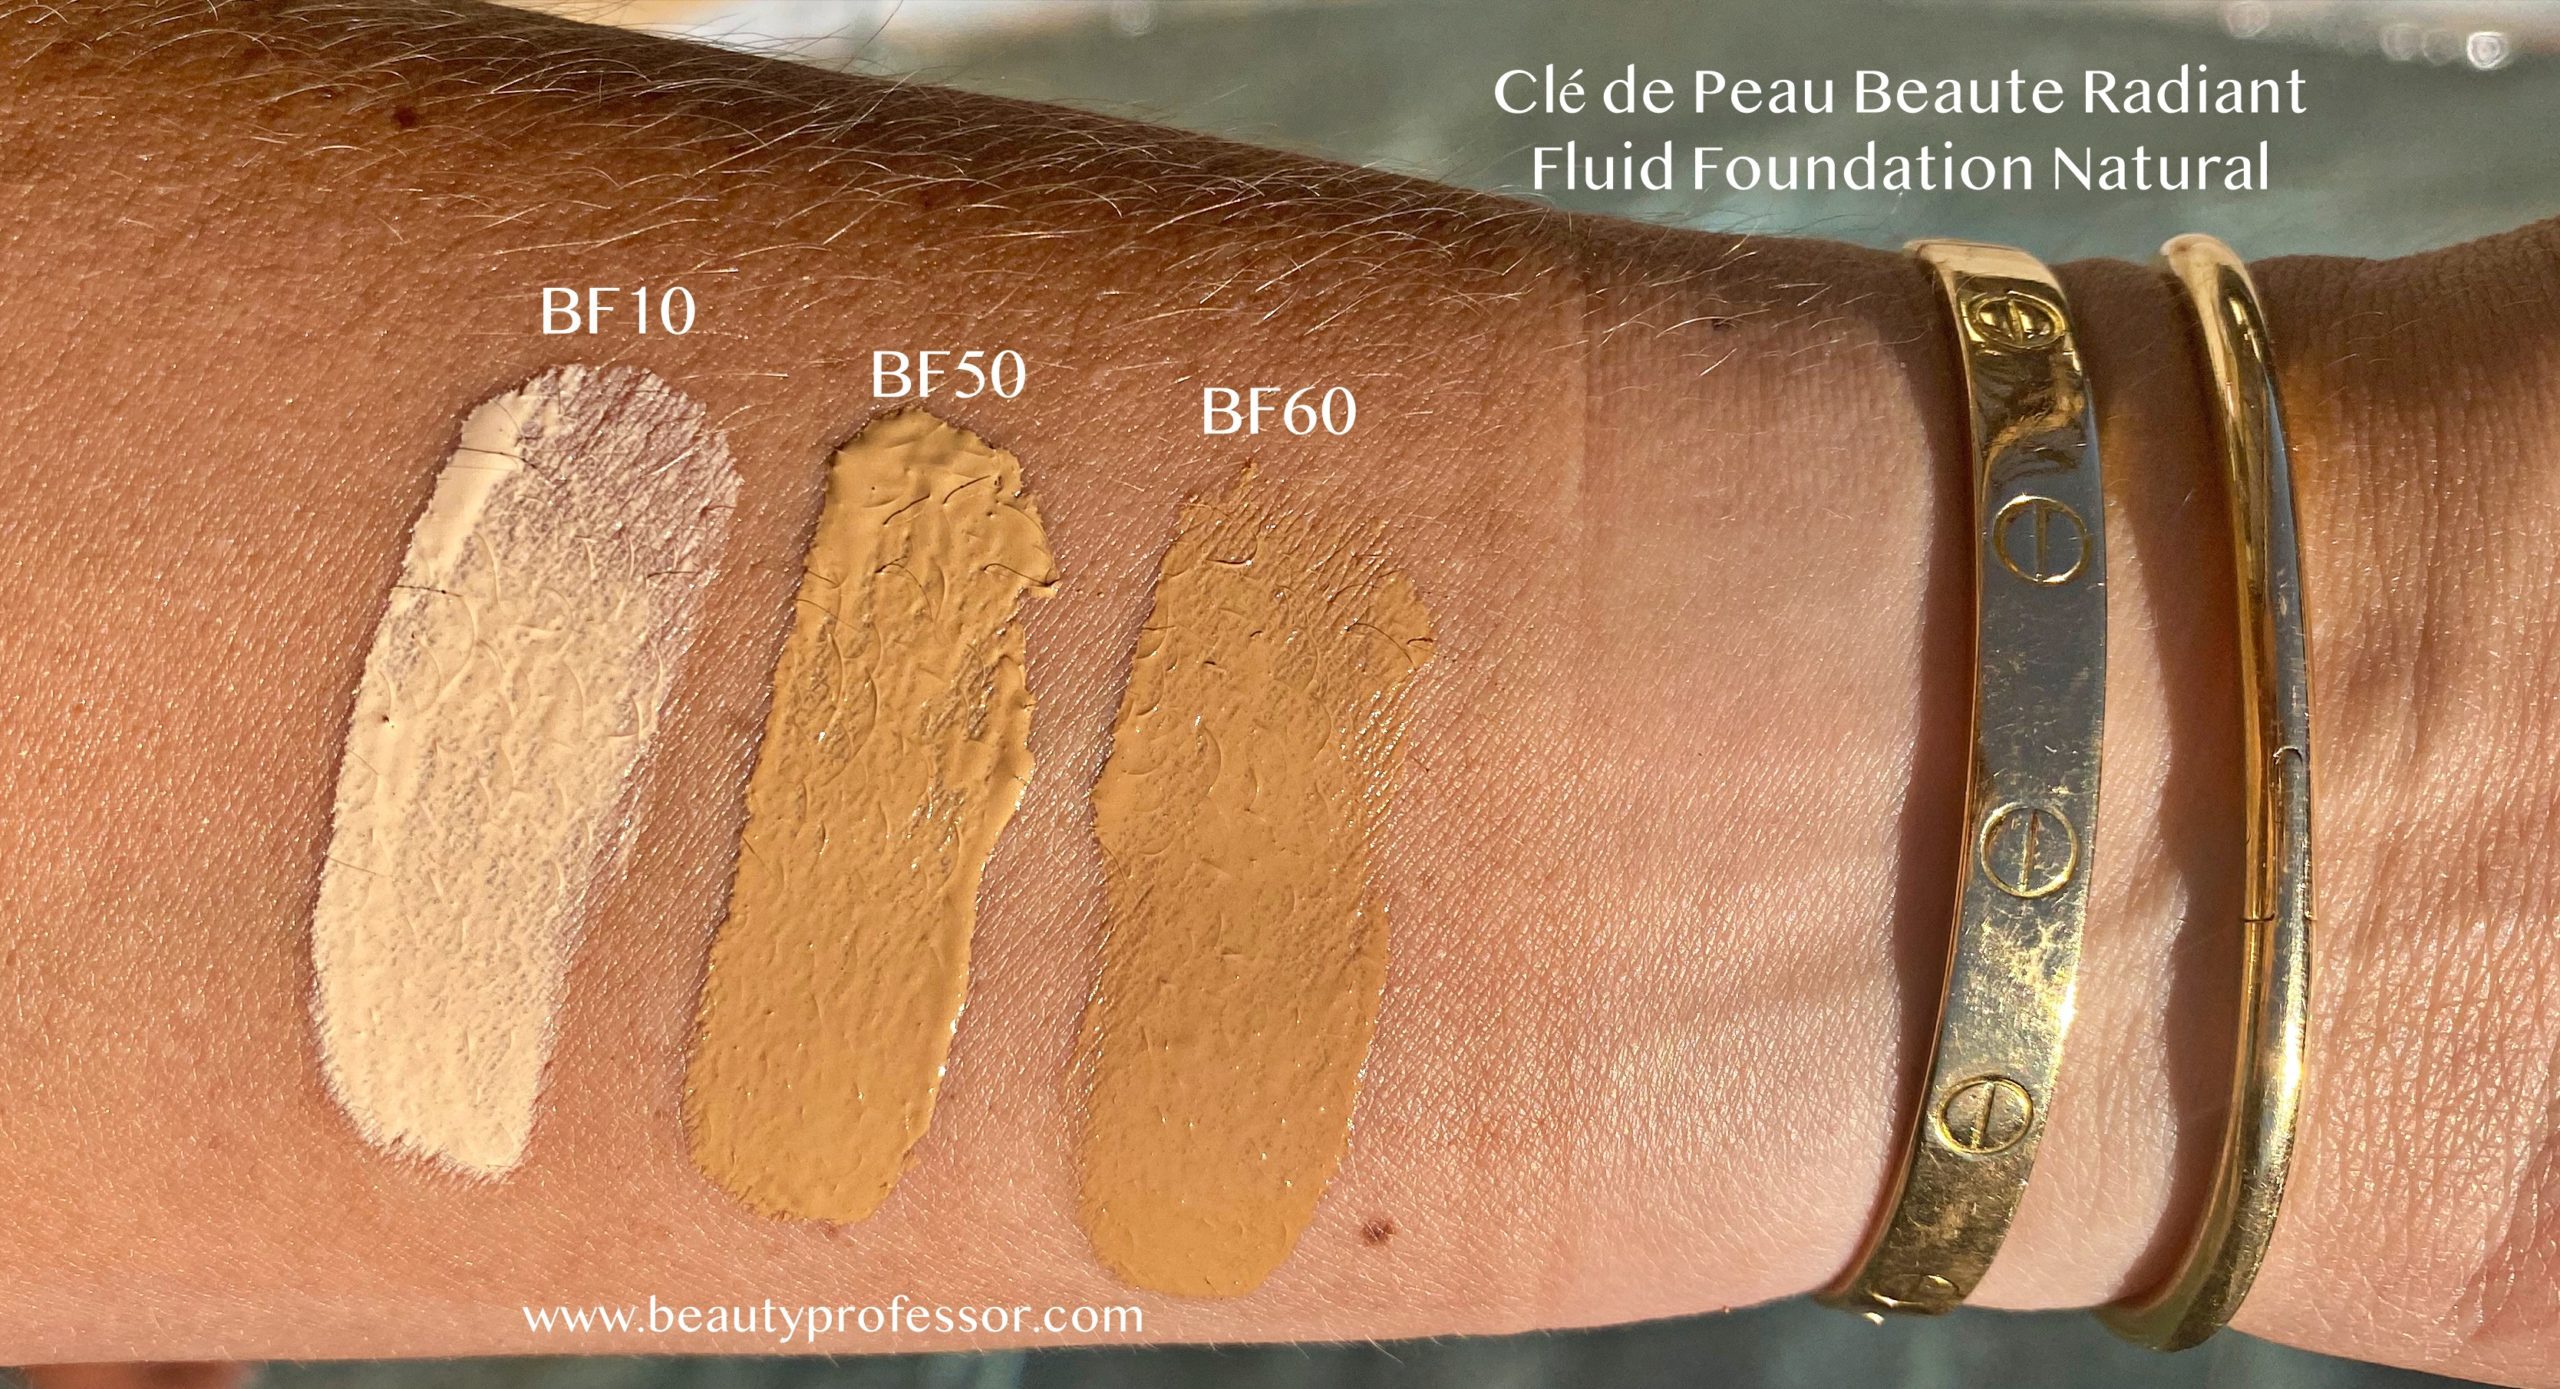 three cle de peau radiant fluid foundation natural swatches on an arm